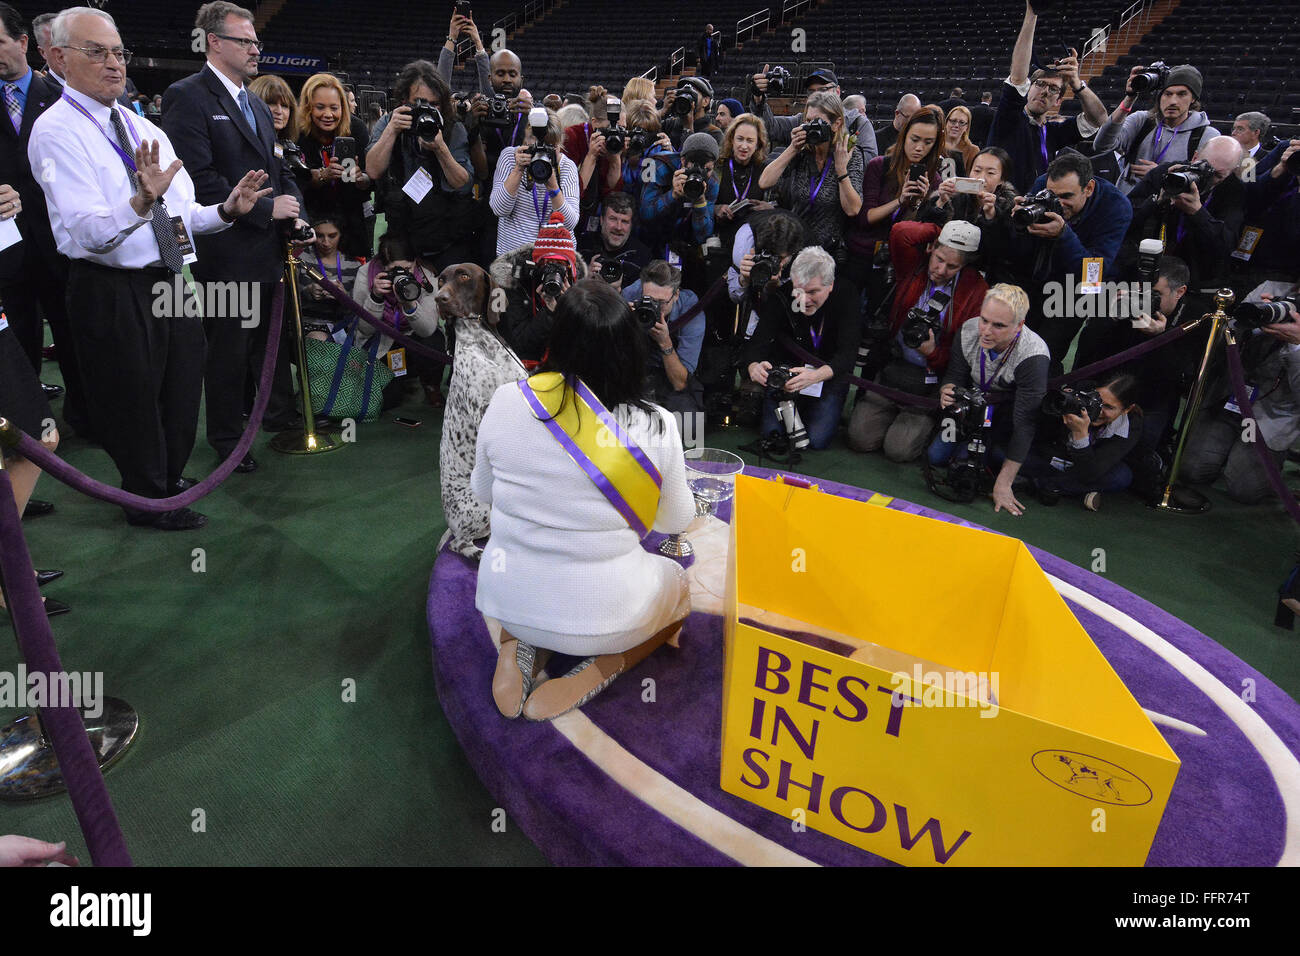 New York, USA. 16th February, 2016. C.J., a German shorthaired pointer, turns away from photographers after winning  Best in Show  at the 140th Westminster Kennel Club dog show Tuesday, Feb. 16, 2016 in New York. At right is owner-handler  Valerie Nunes-Atkinson. Credit:  Shoun Hill/Alamy Live News Stock Photo